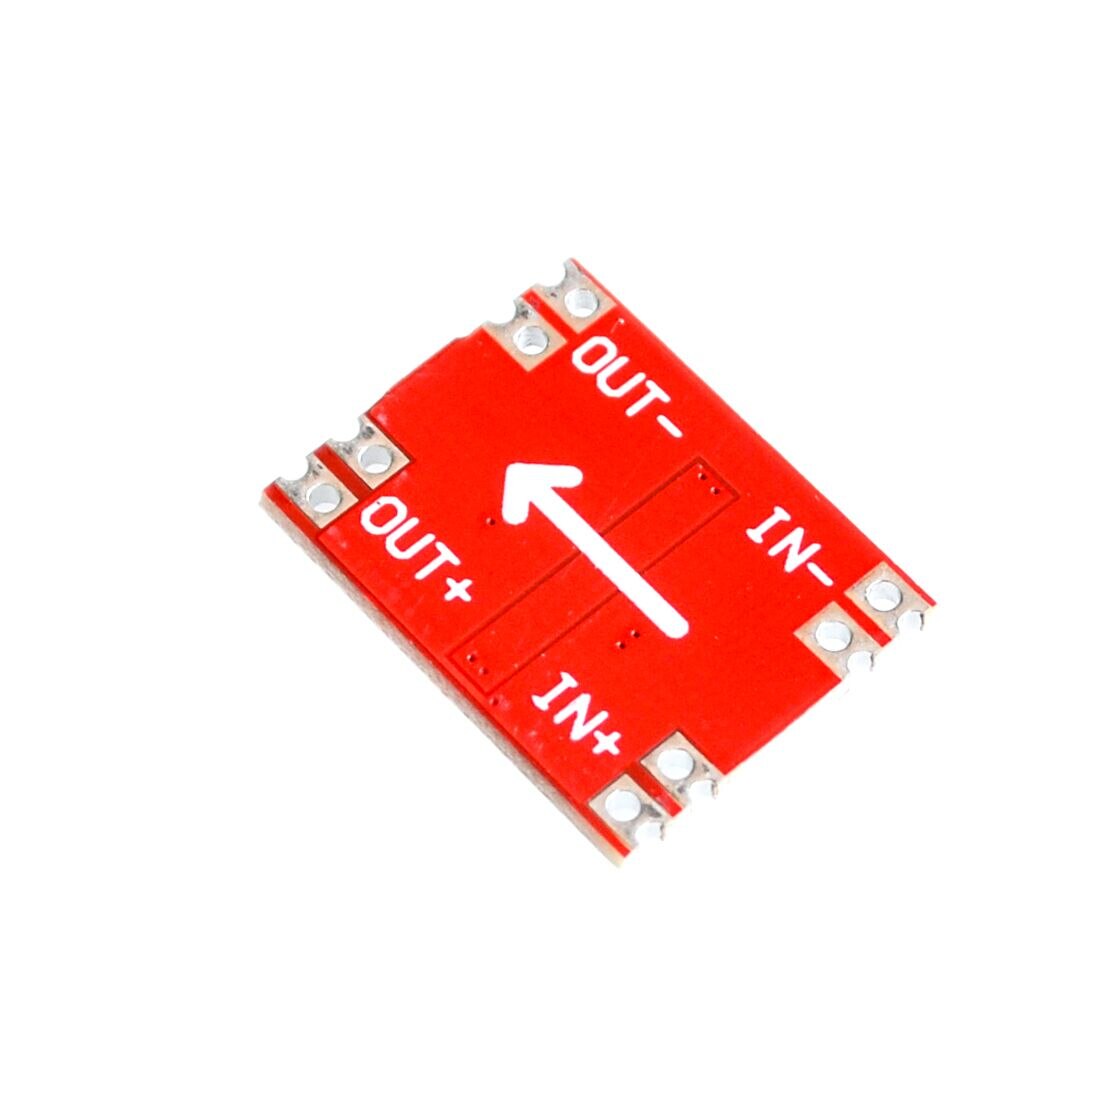 DC DC Boost Power Supply Module Converter Booster Step Up Circuit Board 3V to 5V 1A Highest Efficiency 96% Ultra Small